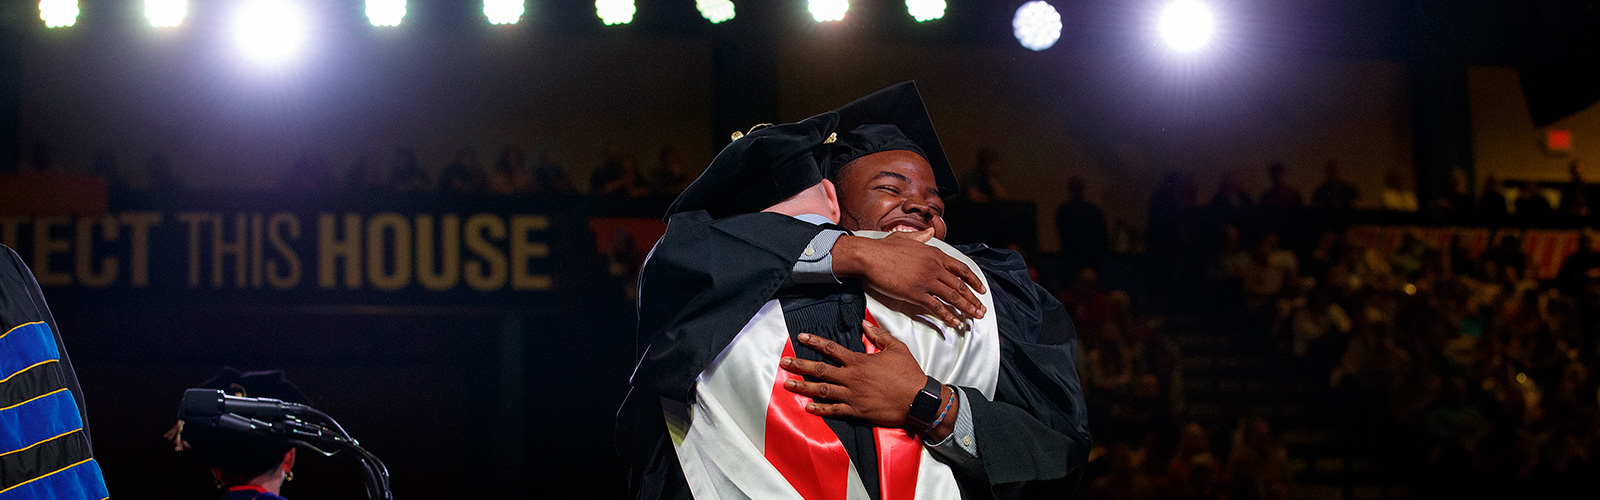 A UT Martin graduate embraces Chancellor Keith Carver at a commencement ceremony